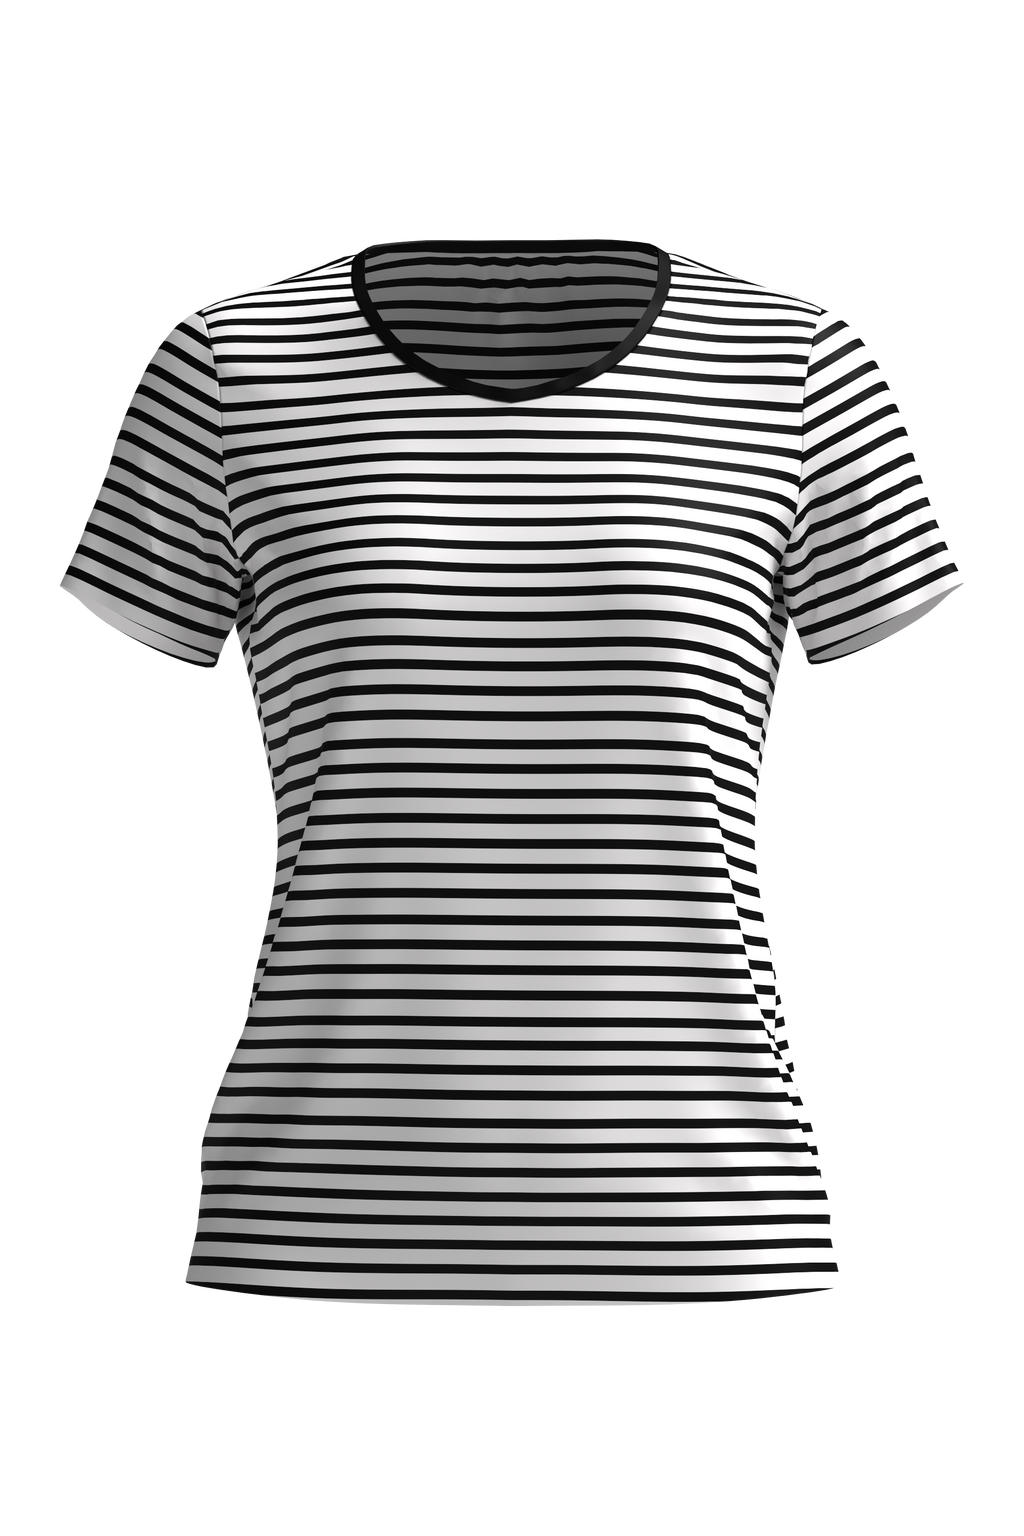 Recycled Cotton Ladies Striped Tops - Organic Cotton Certified